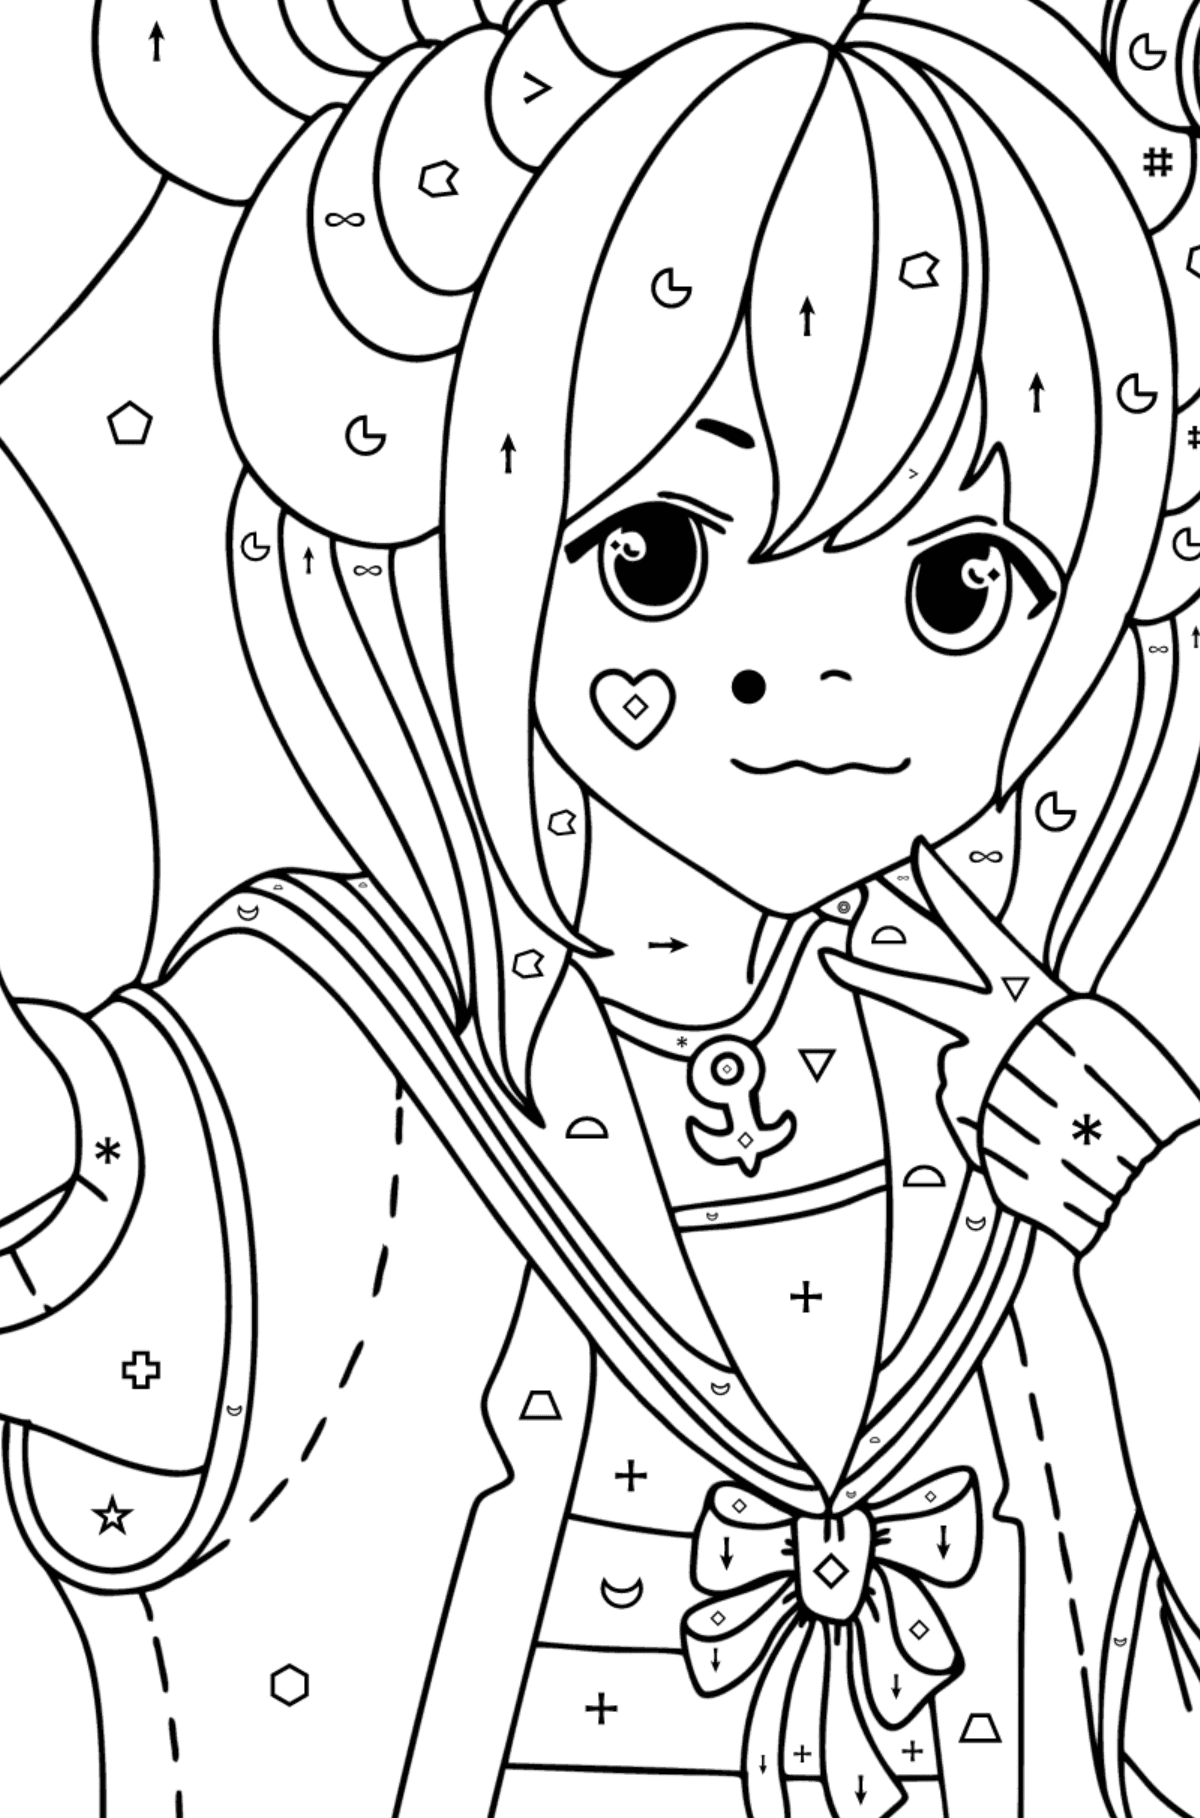 Anime school girl coloring page - Coloring by Symbols and Geometric Shapes for Kids